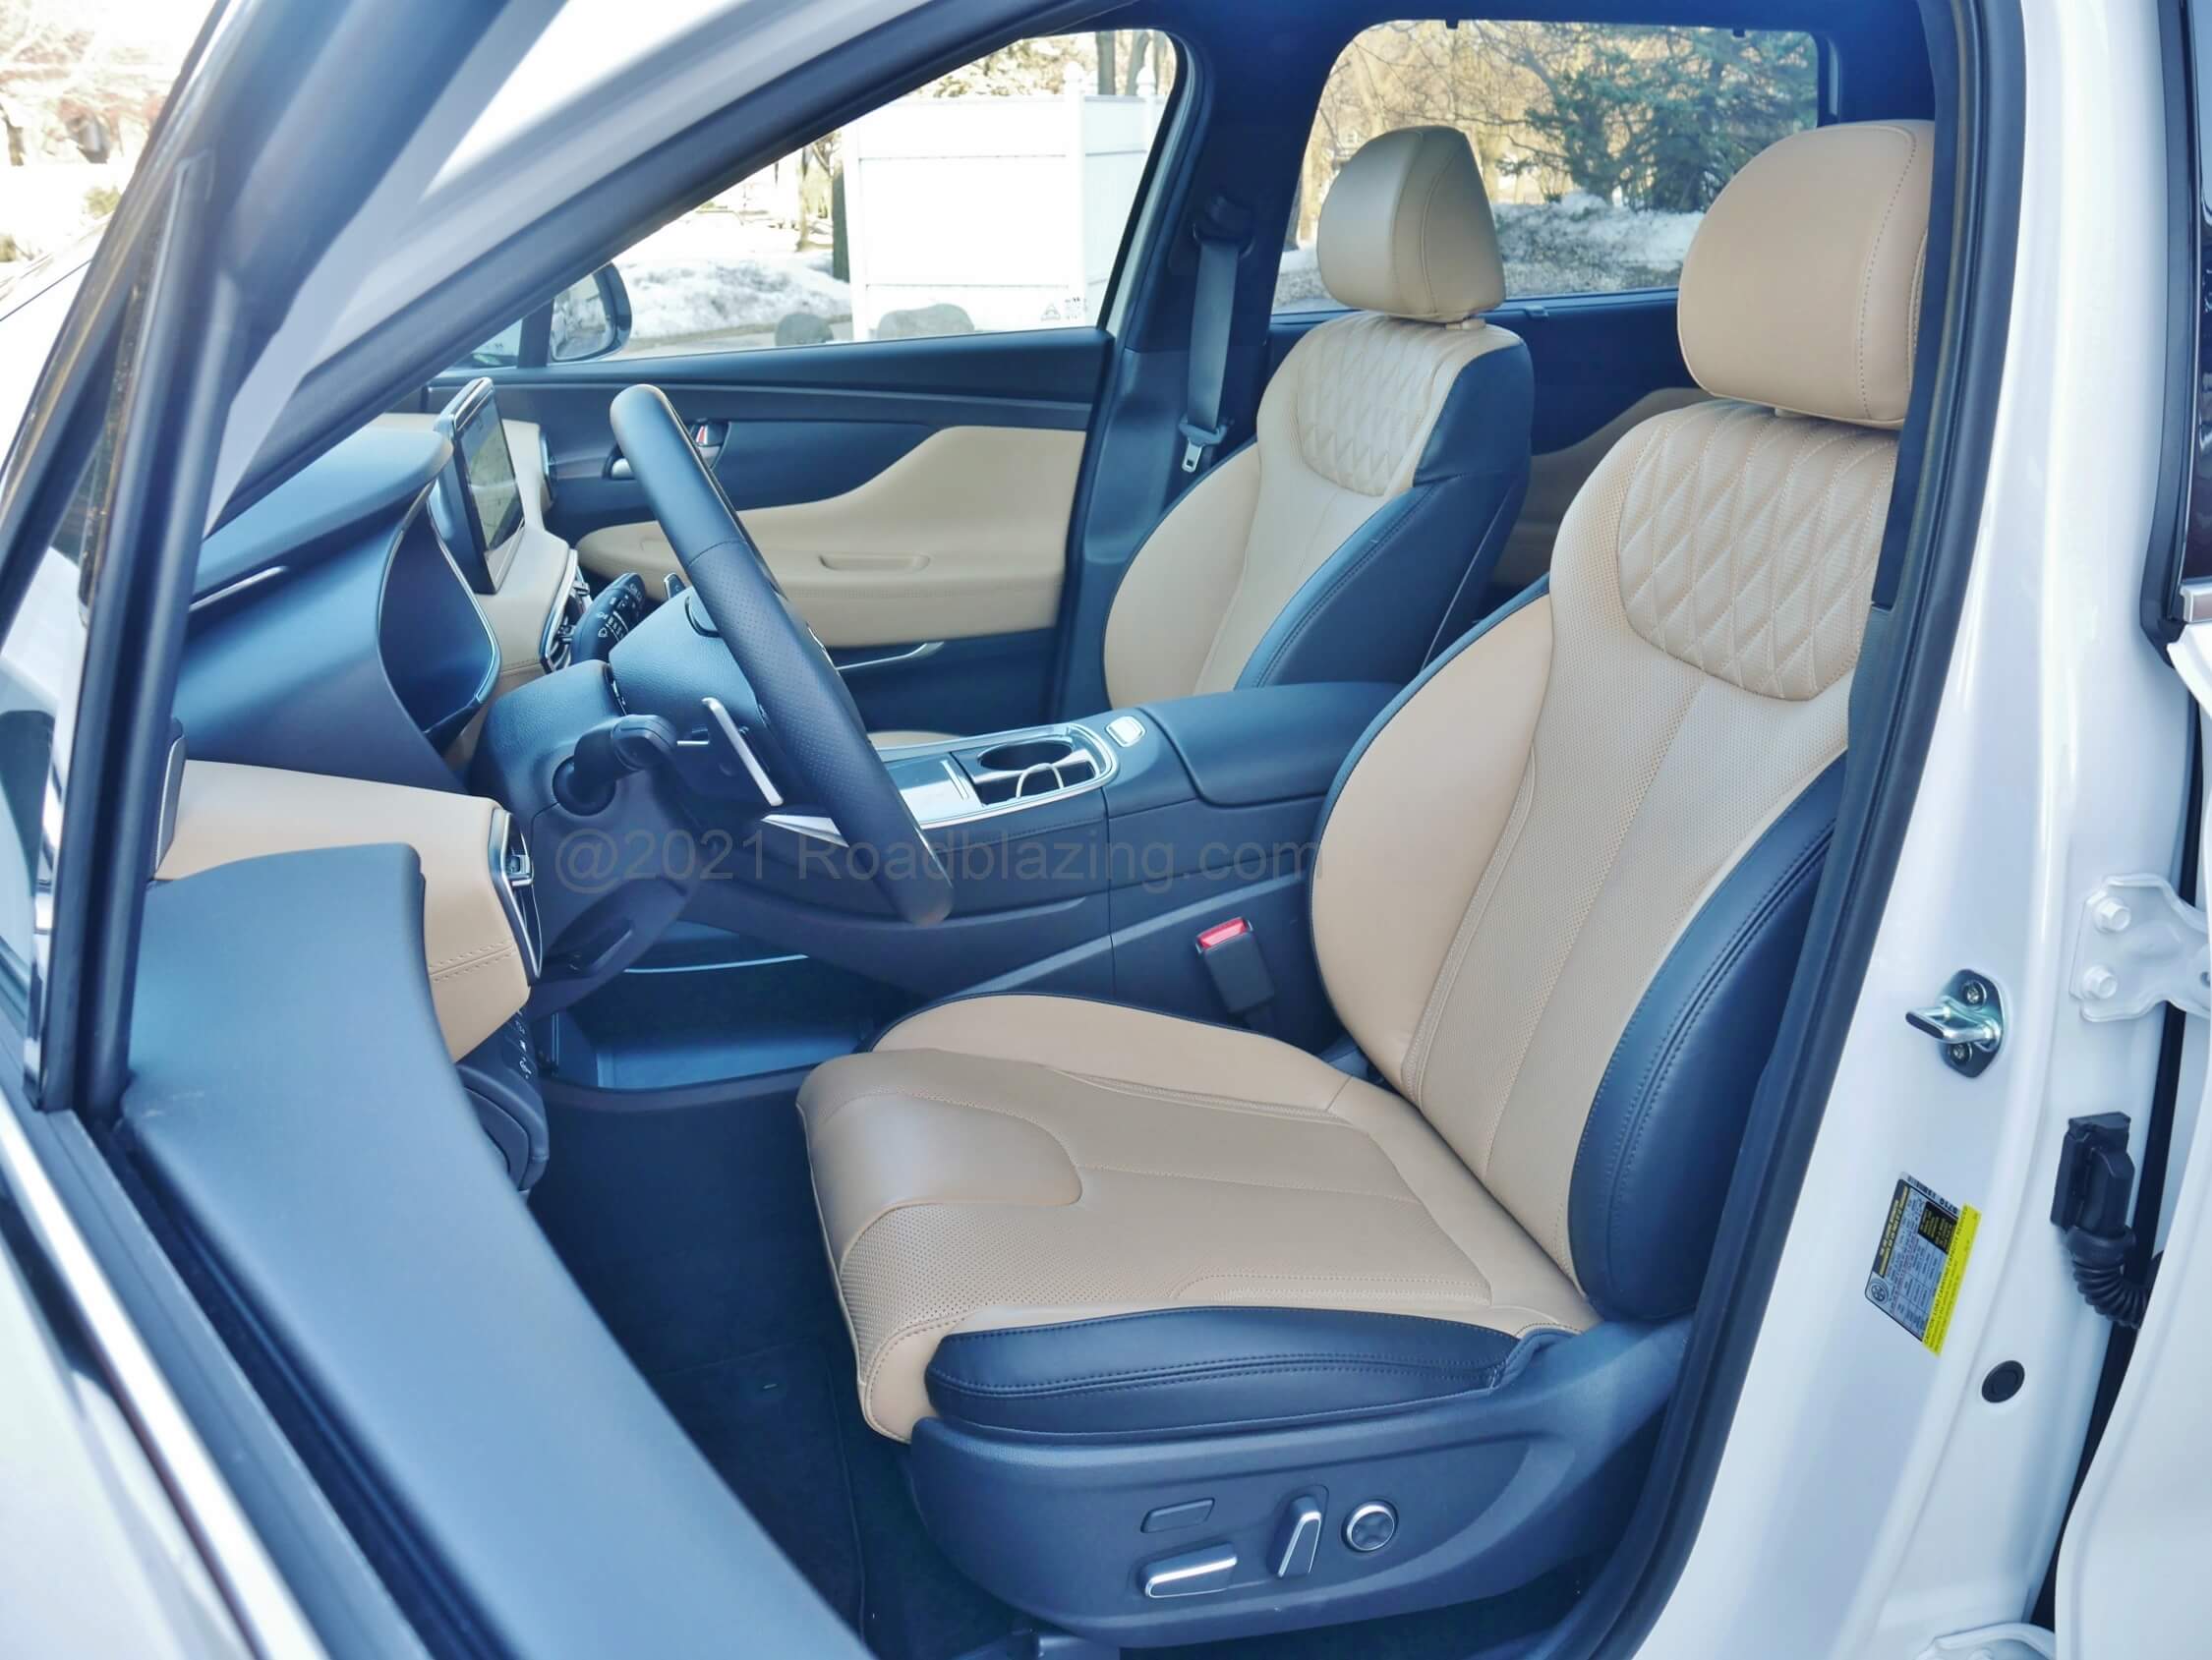 2021 Hyundai Santa Fe 2.5T Calligraphy AWD: quilted leathers, front heating & cooling, 2nd Row heating & metallic power controls make for luxurious cabin furnishings